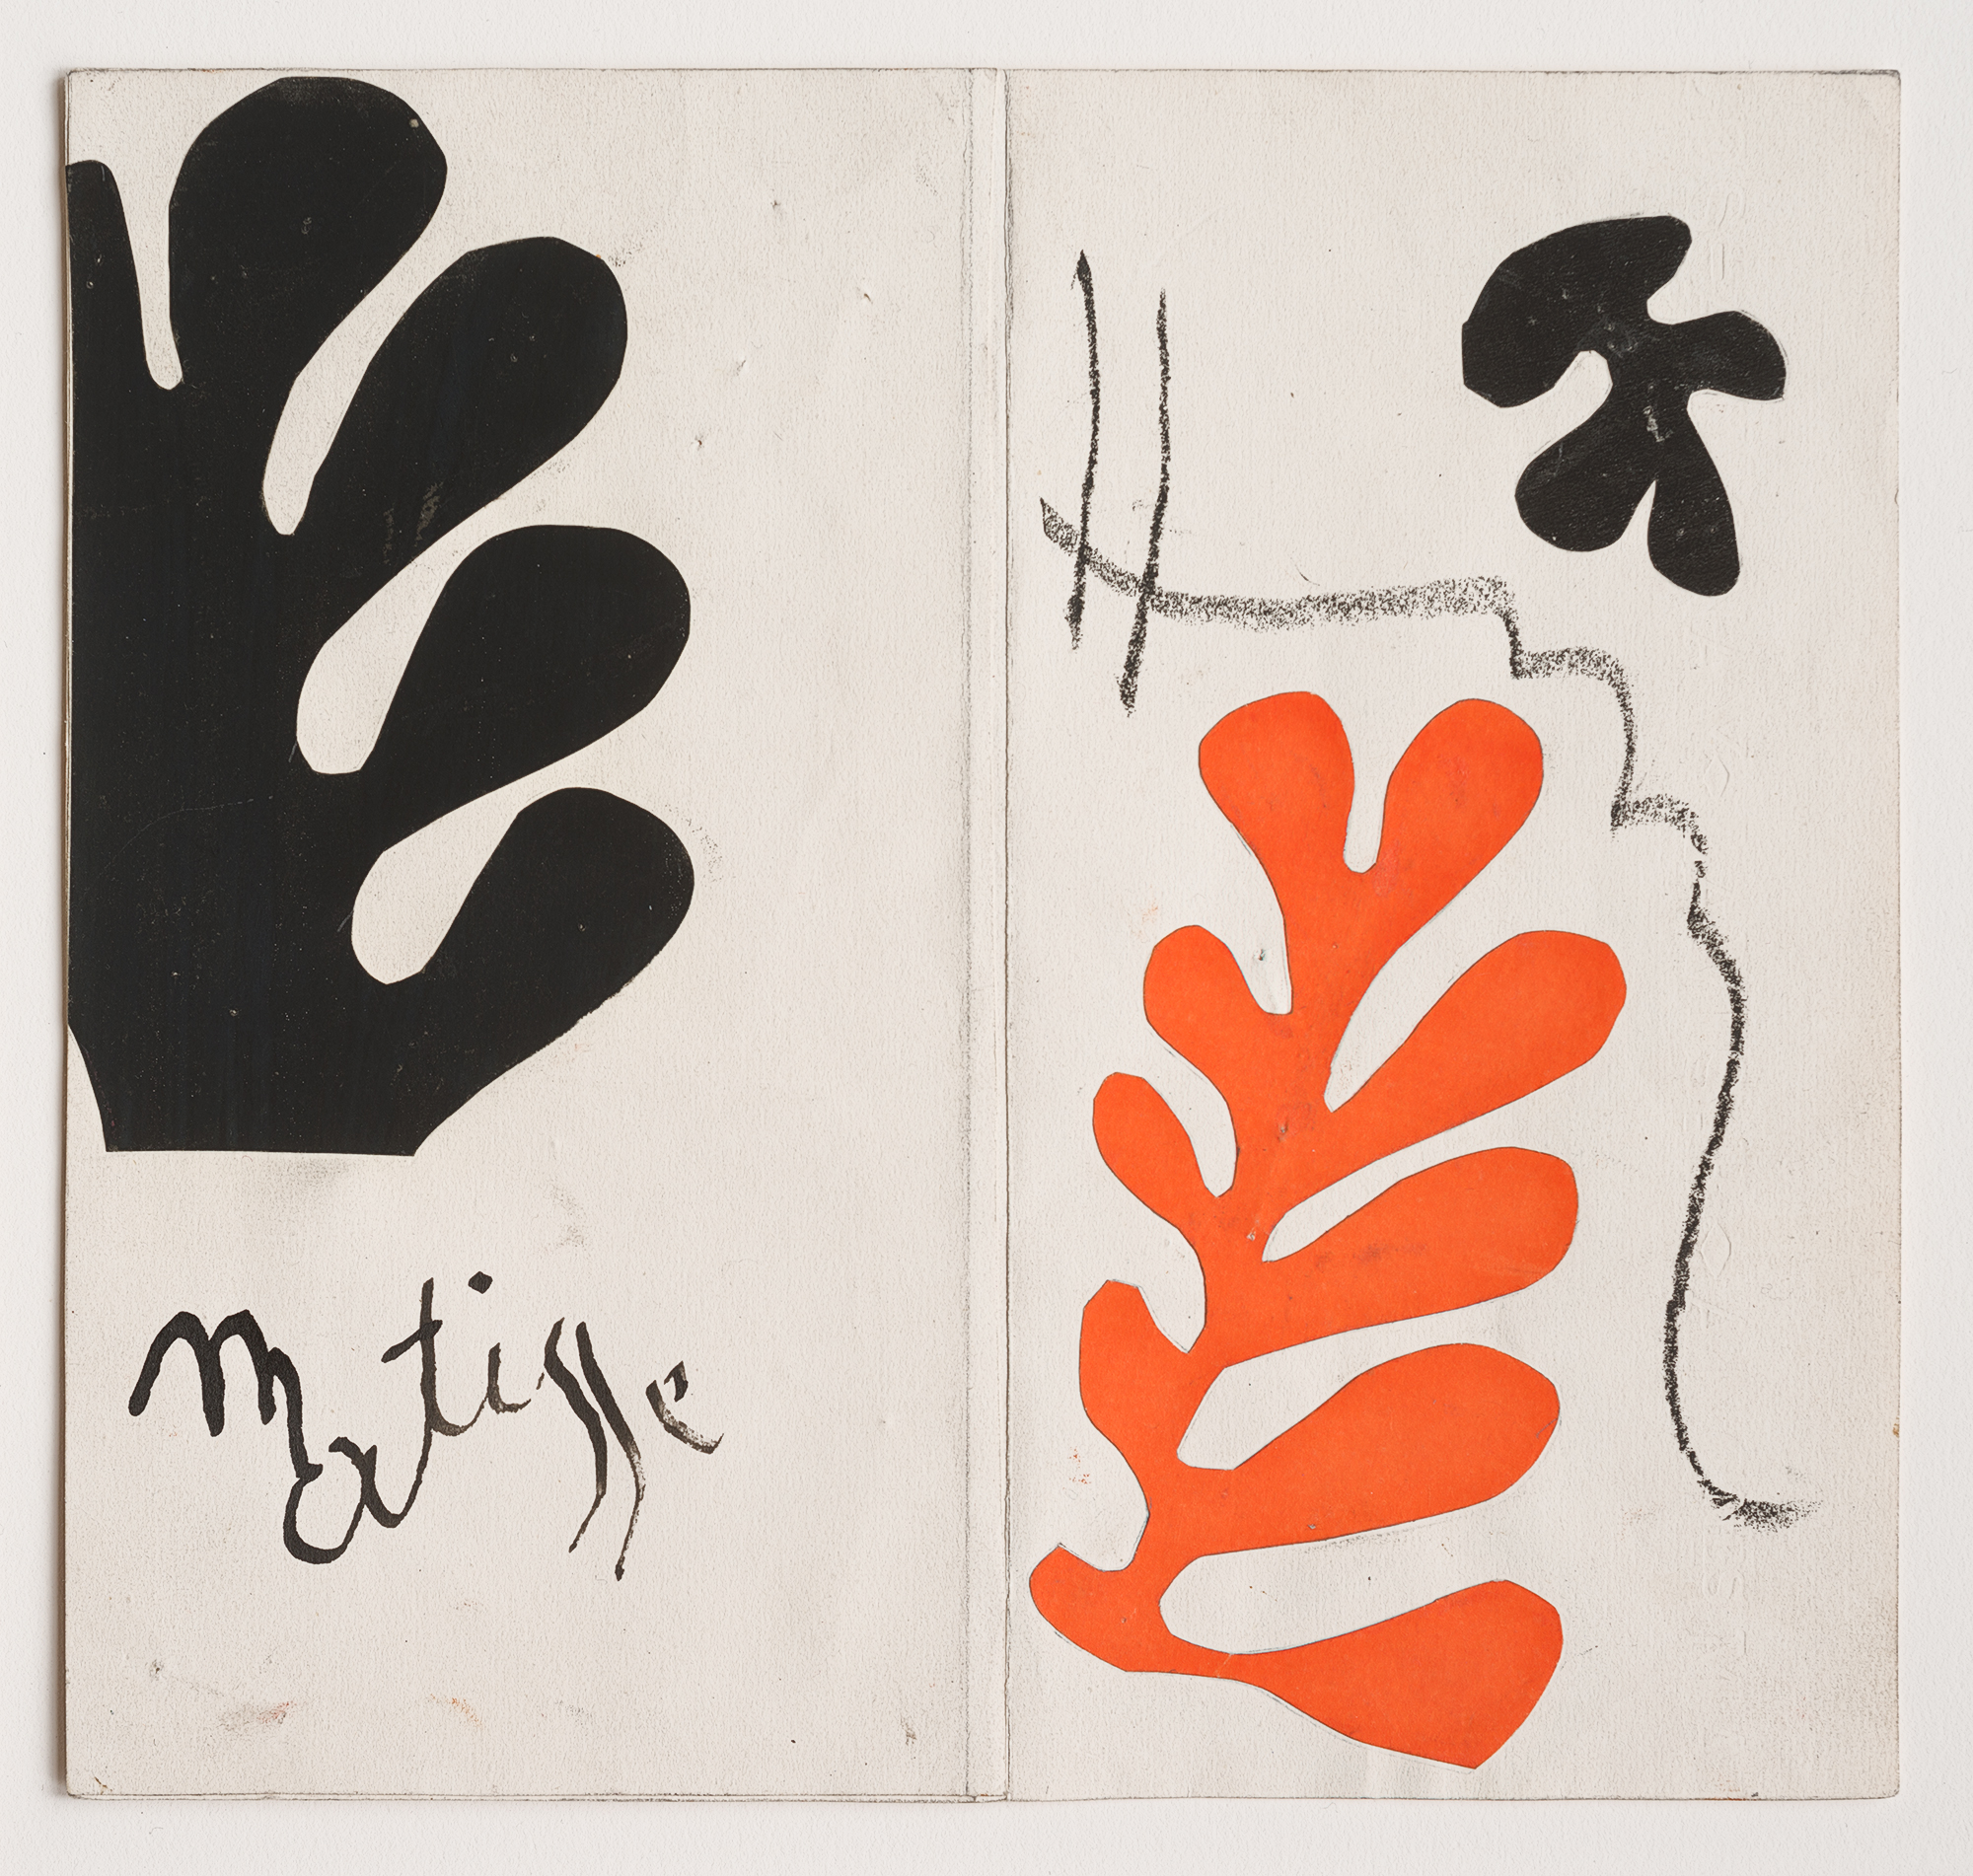 How Did Matisse Make His Paper Cut-Outs?